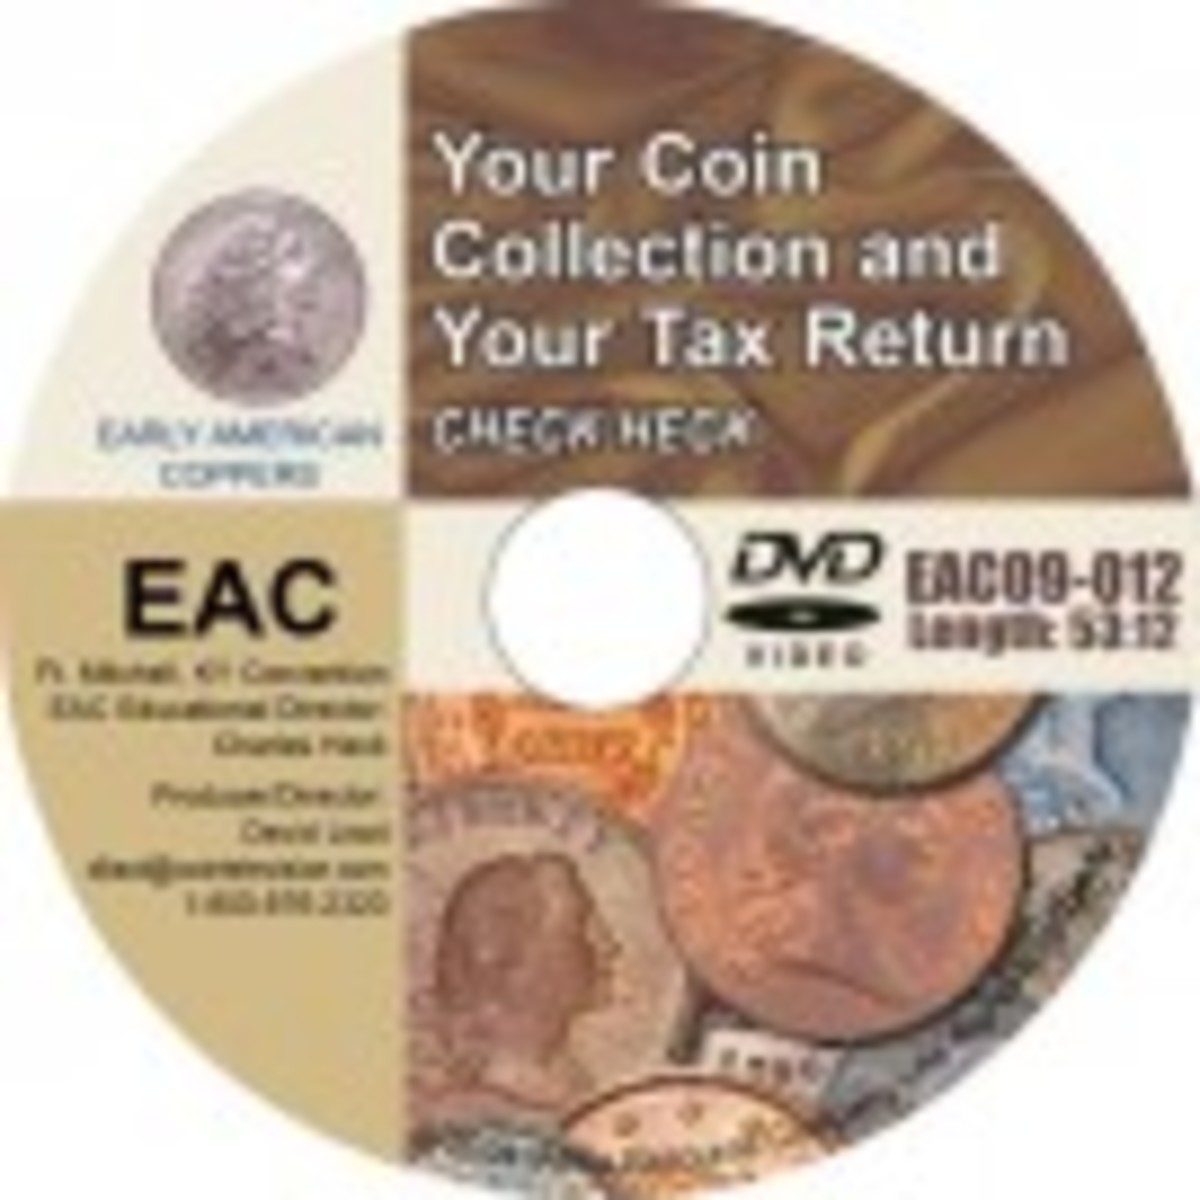 Your Coin Collection and Your Tax Return